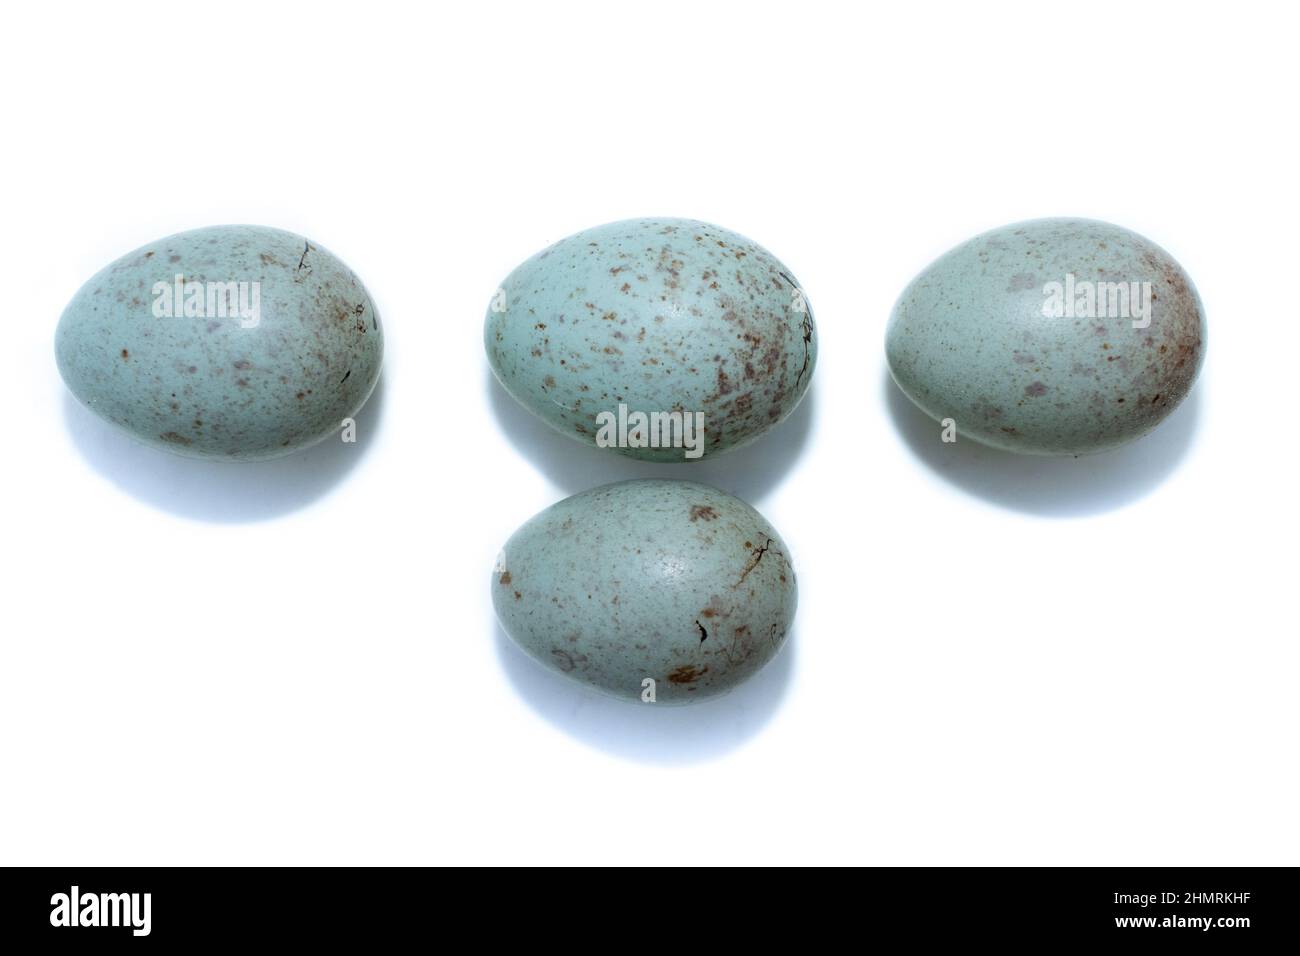 Turdus viscivorus. The eggs of the Mistle Thrush in front of white background, isolated. Stock Photo